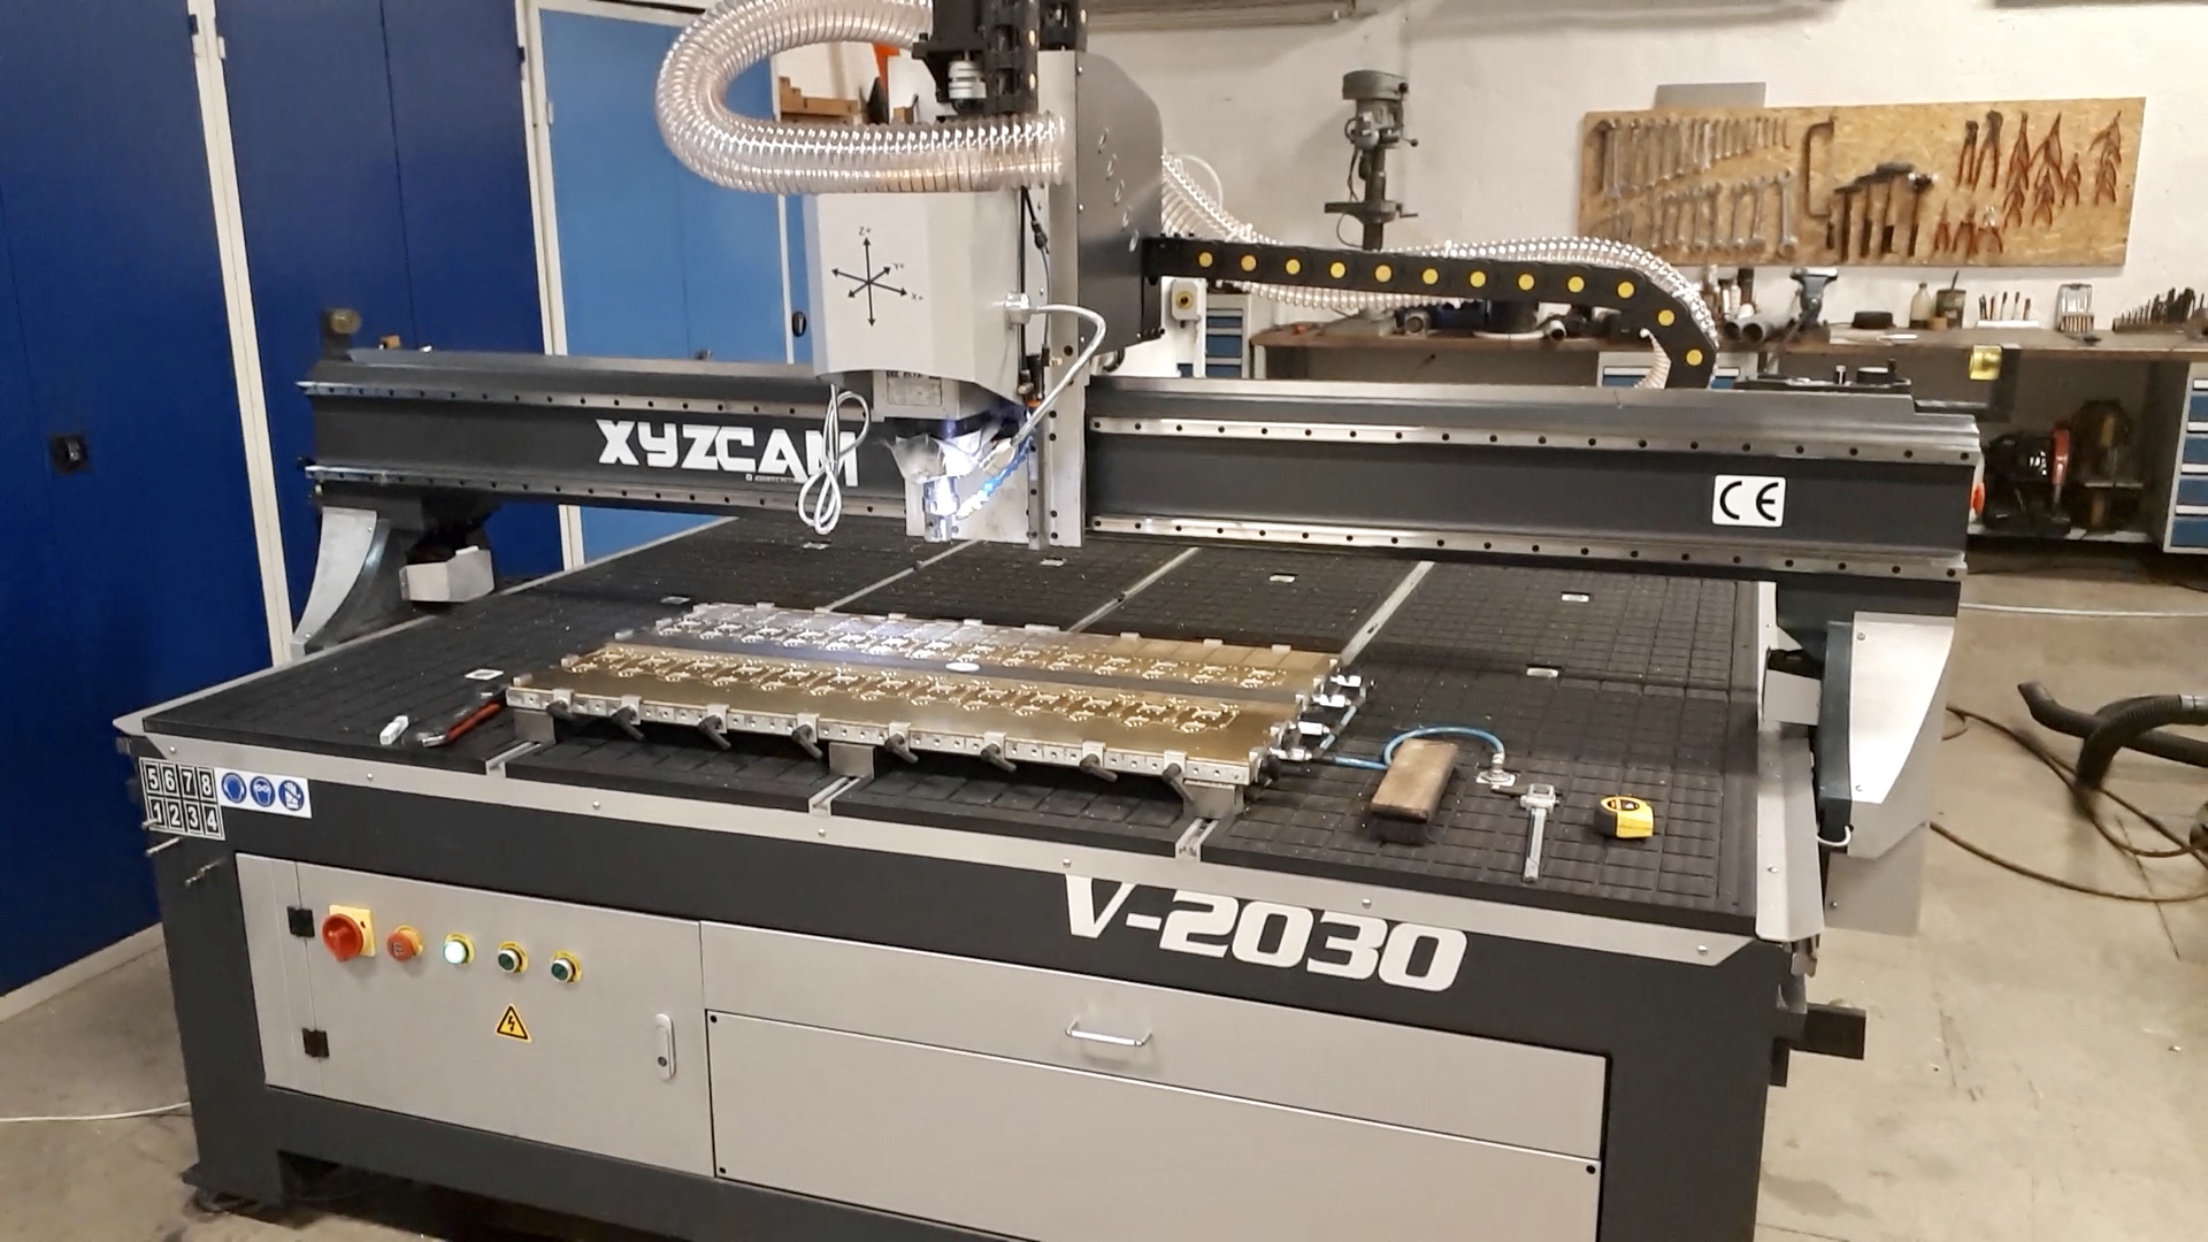 XYZCAM,V2030s Working Scene on Brass & Steel, precision & affordable CNC Solutio